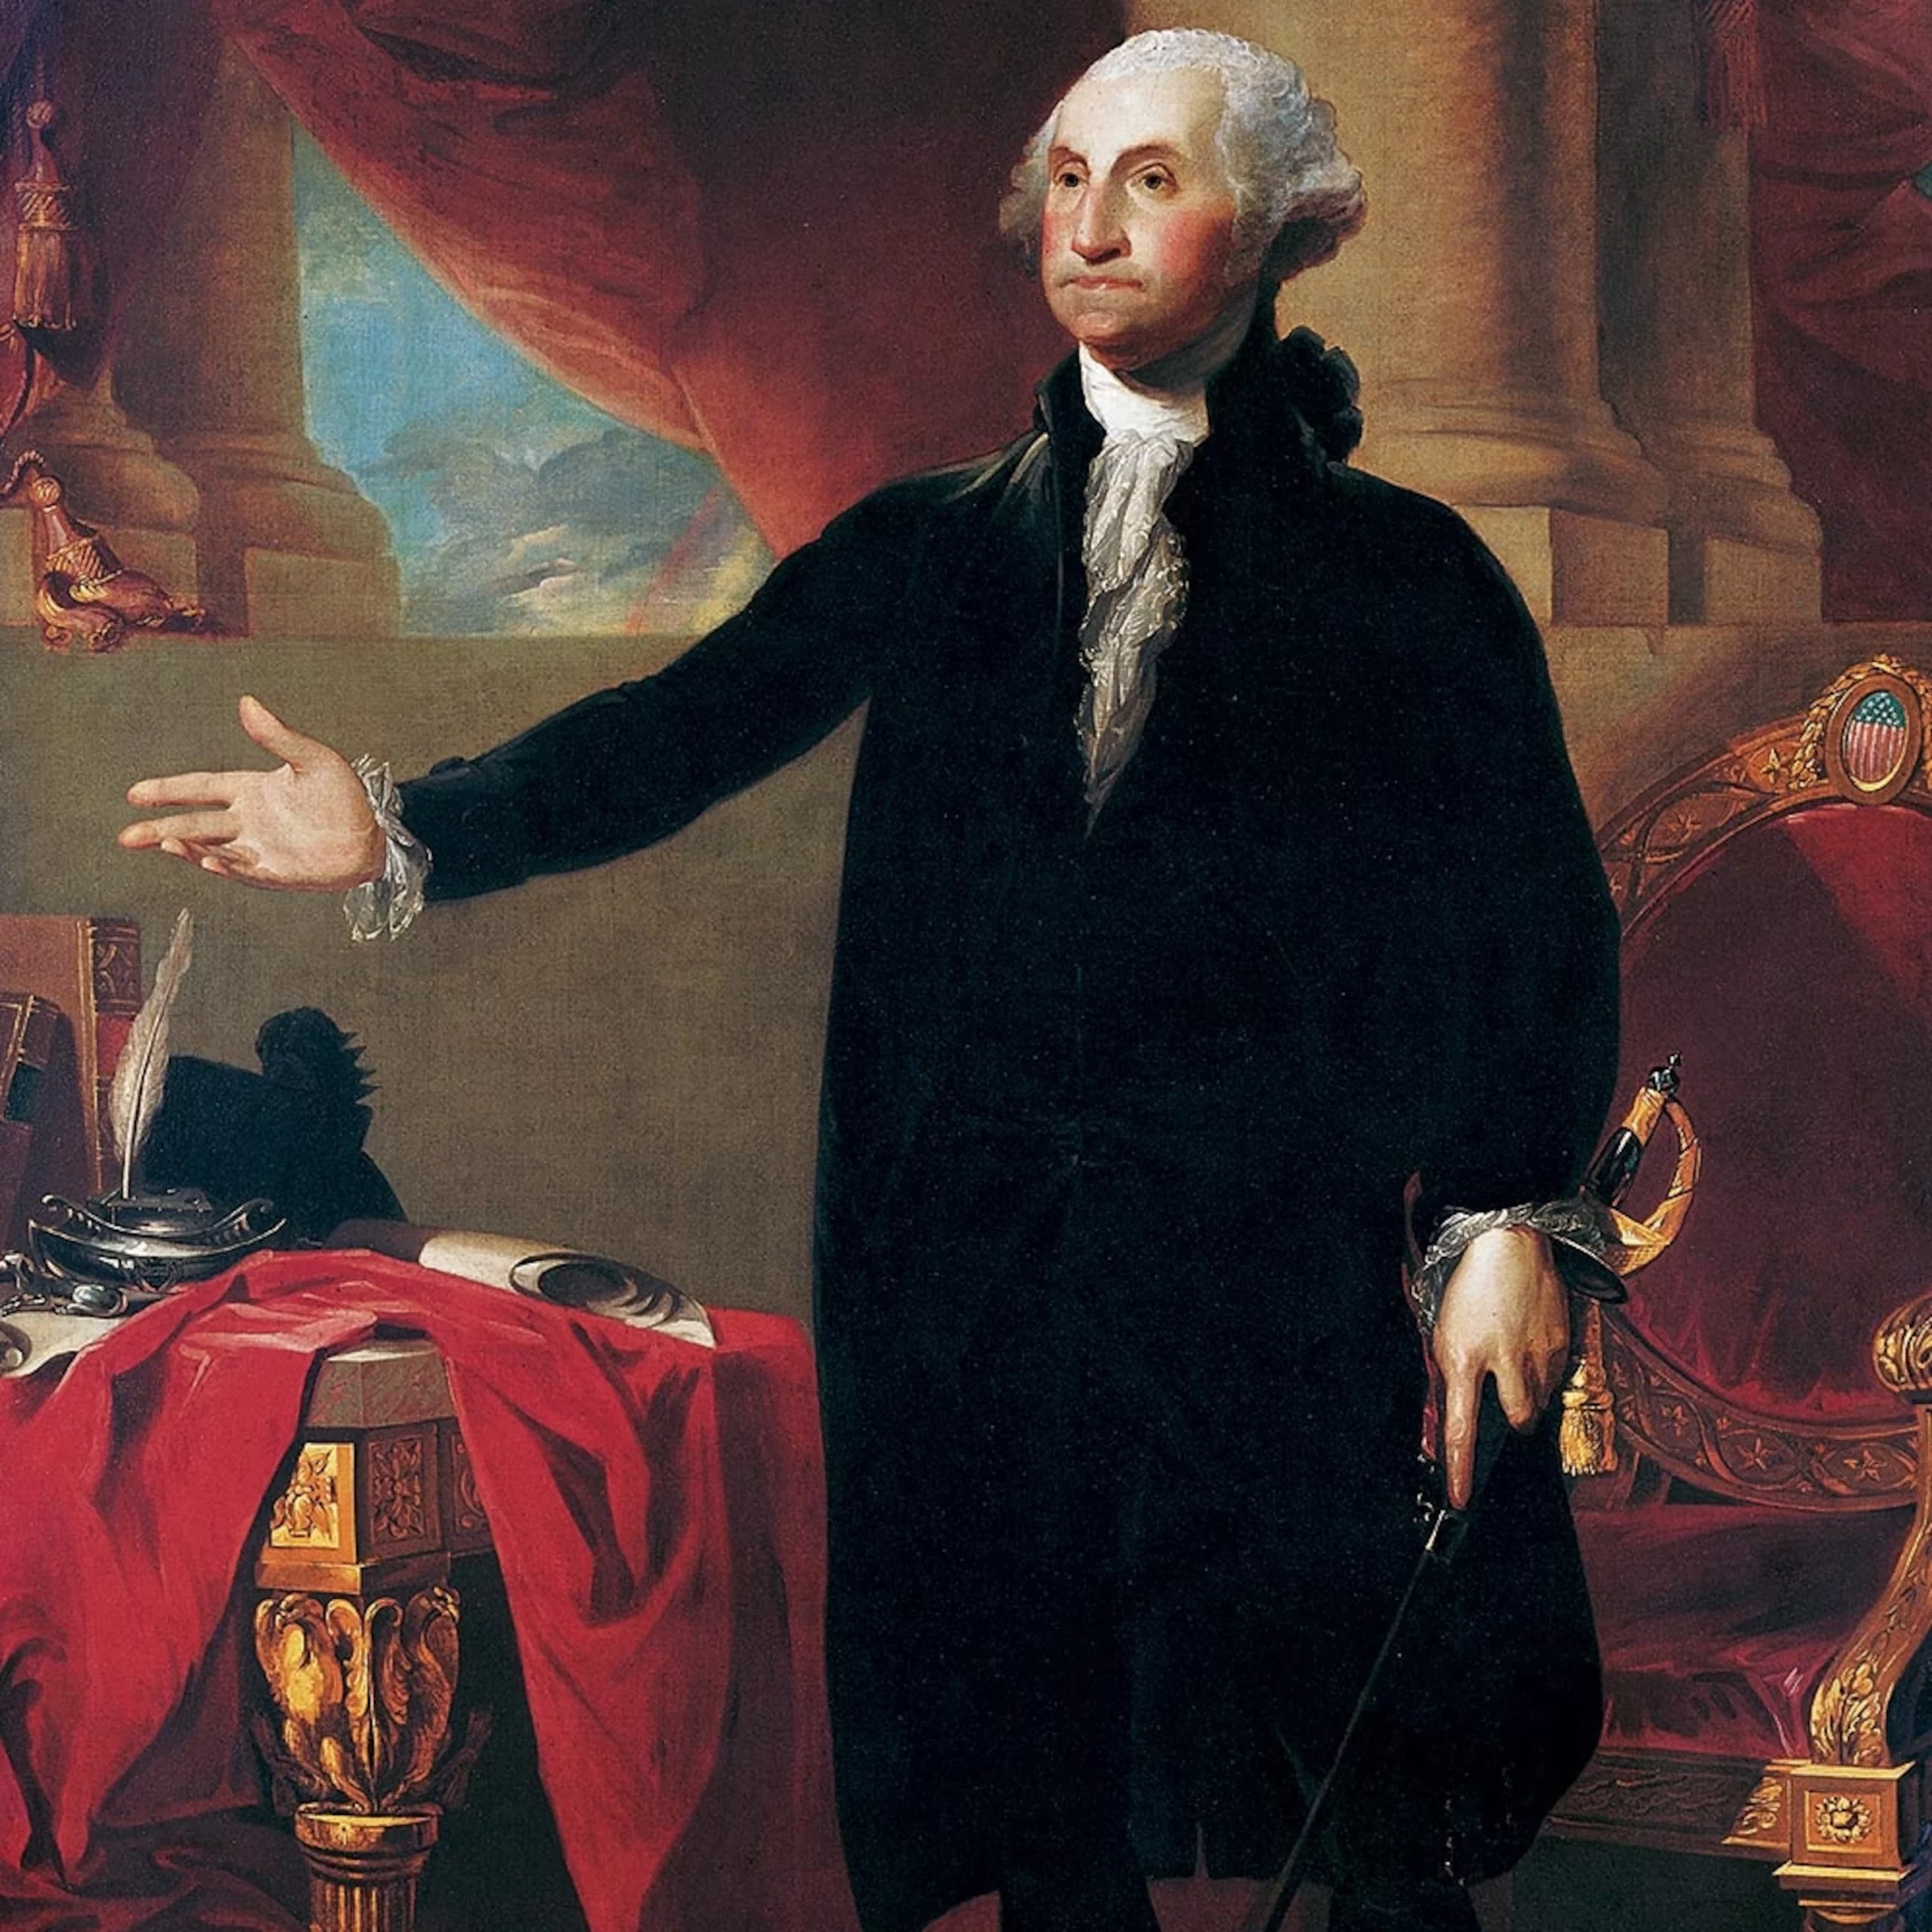 Founder of United States of America